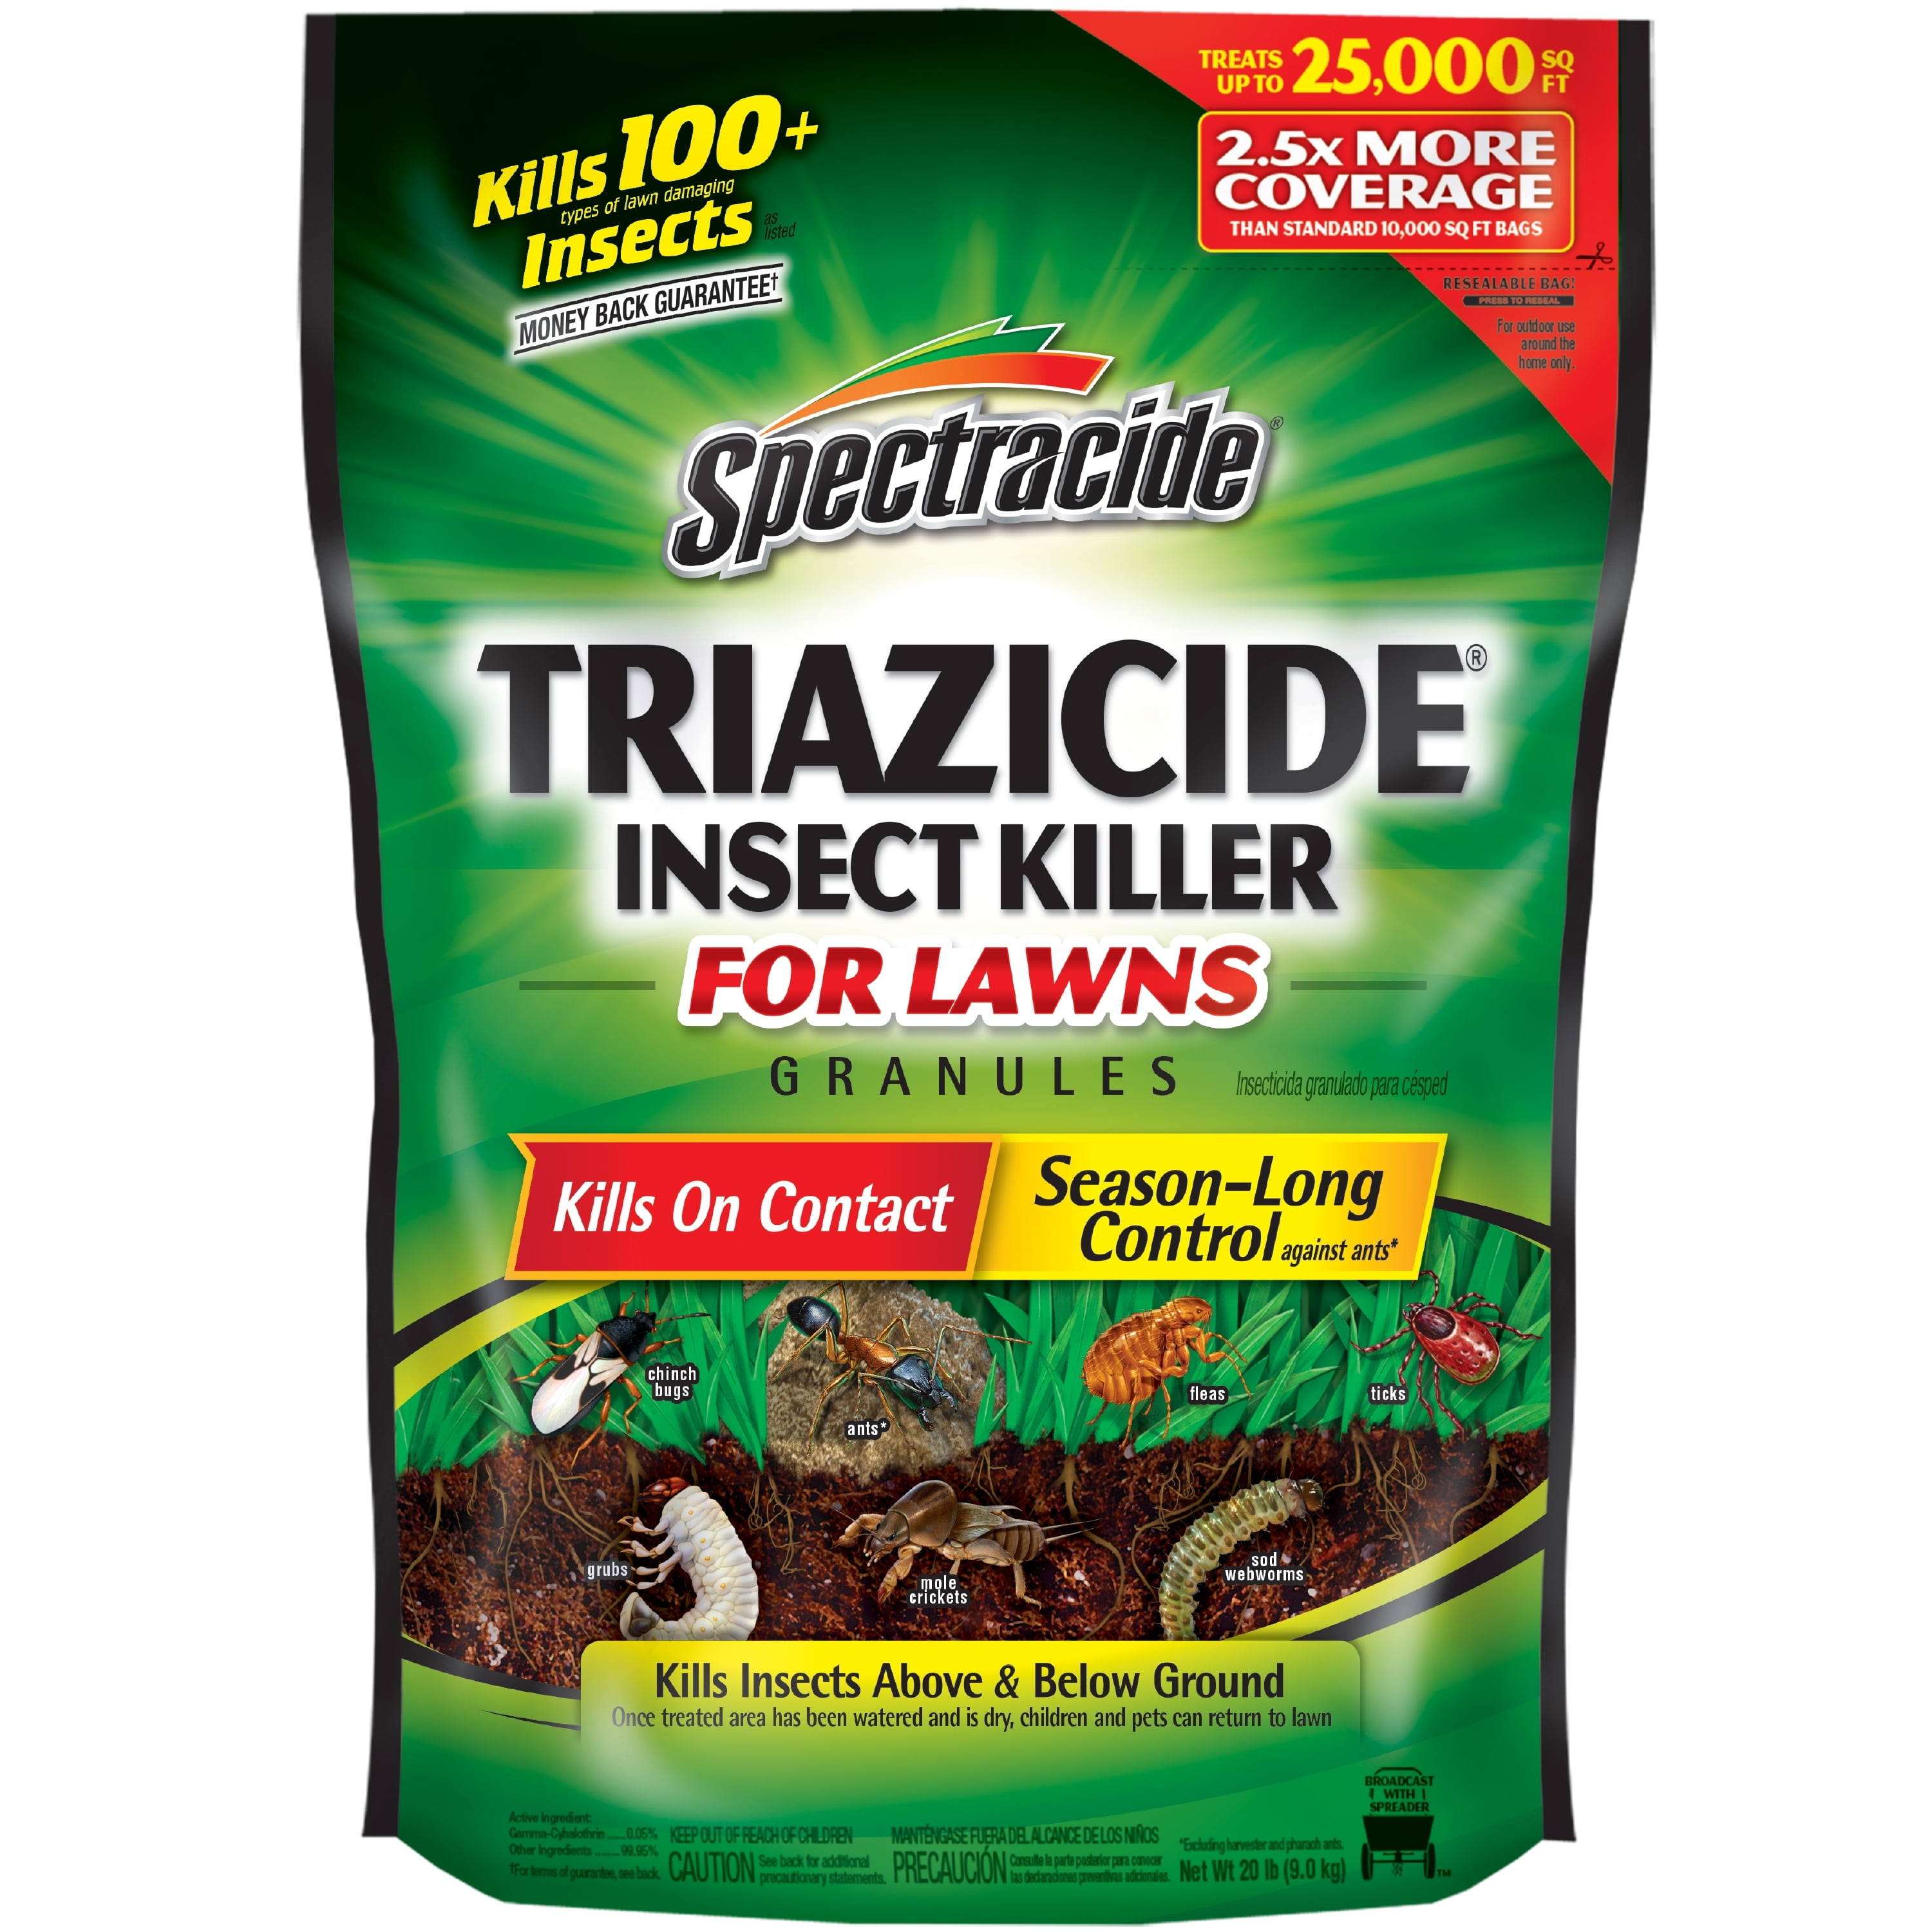 Today Buy Spectracide Triazicide Insect Killer for Lawns Granules 20 lbs at...